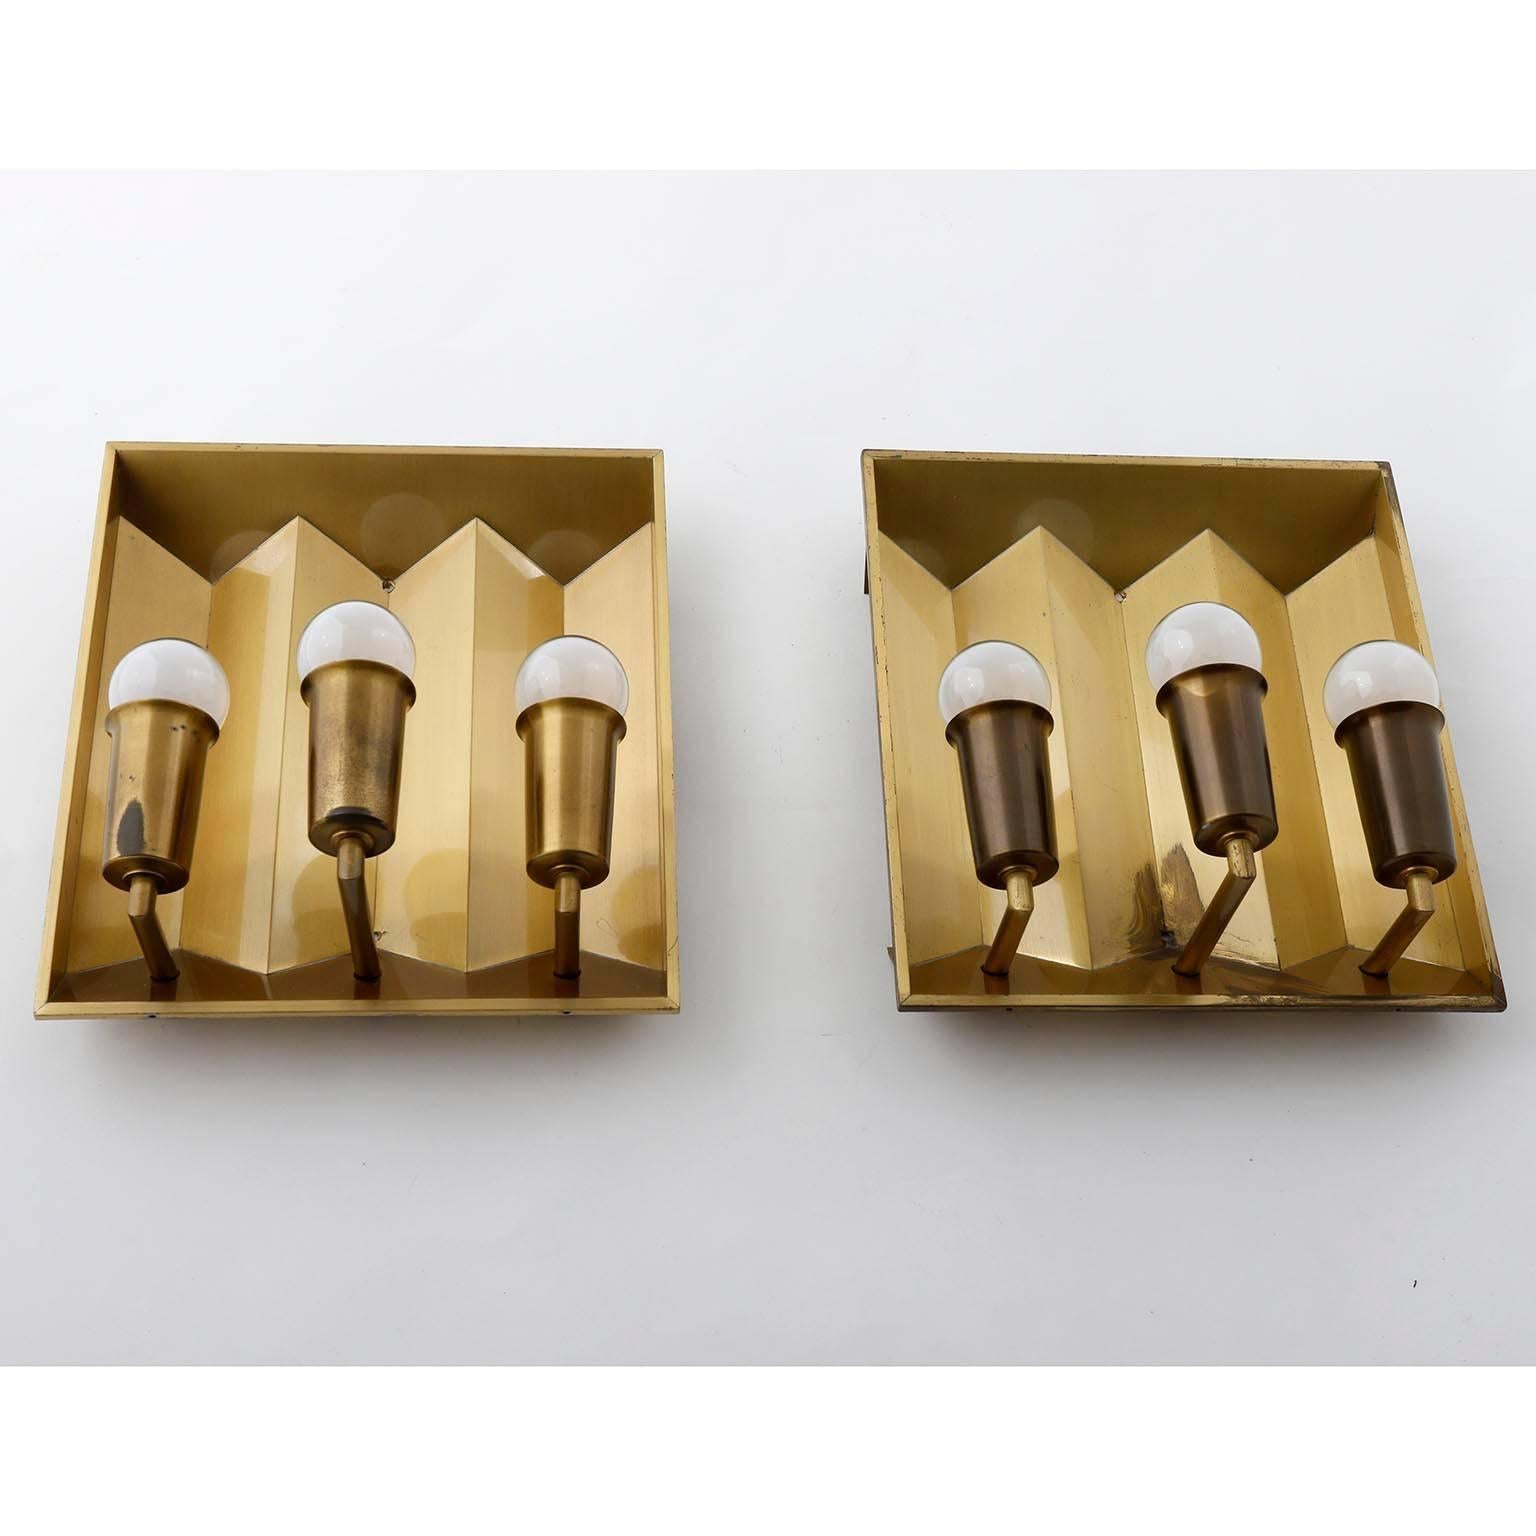 A pair of brass wall lamps by Fog & Morup in the style of Hans-Agne Jakobsson, manufactured in midcentury, circa 1960 (late 1950s or early 1960s).
Each lamp takes three E14 candelabra screw base bulbs with max. 40Watt per bulb.  They work well with